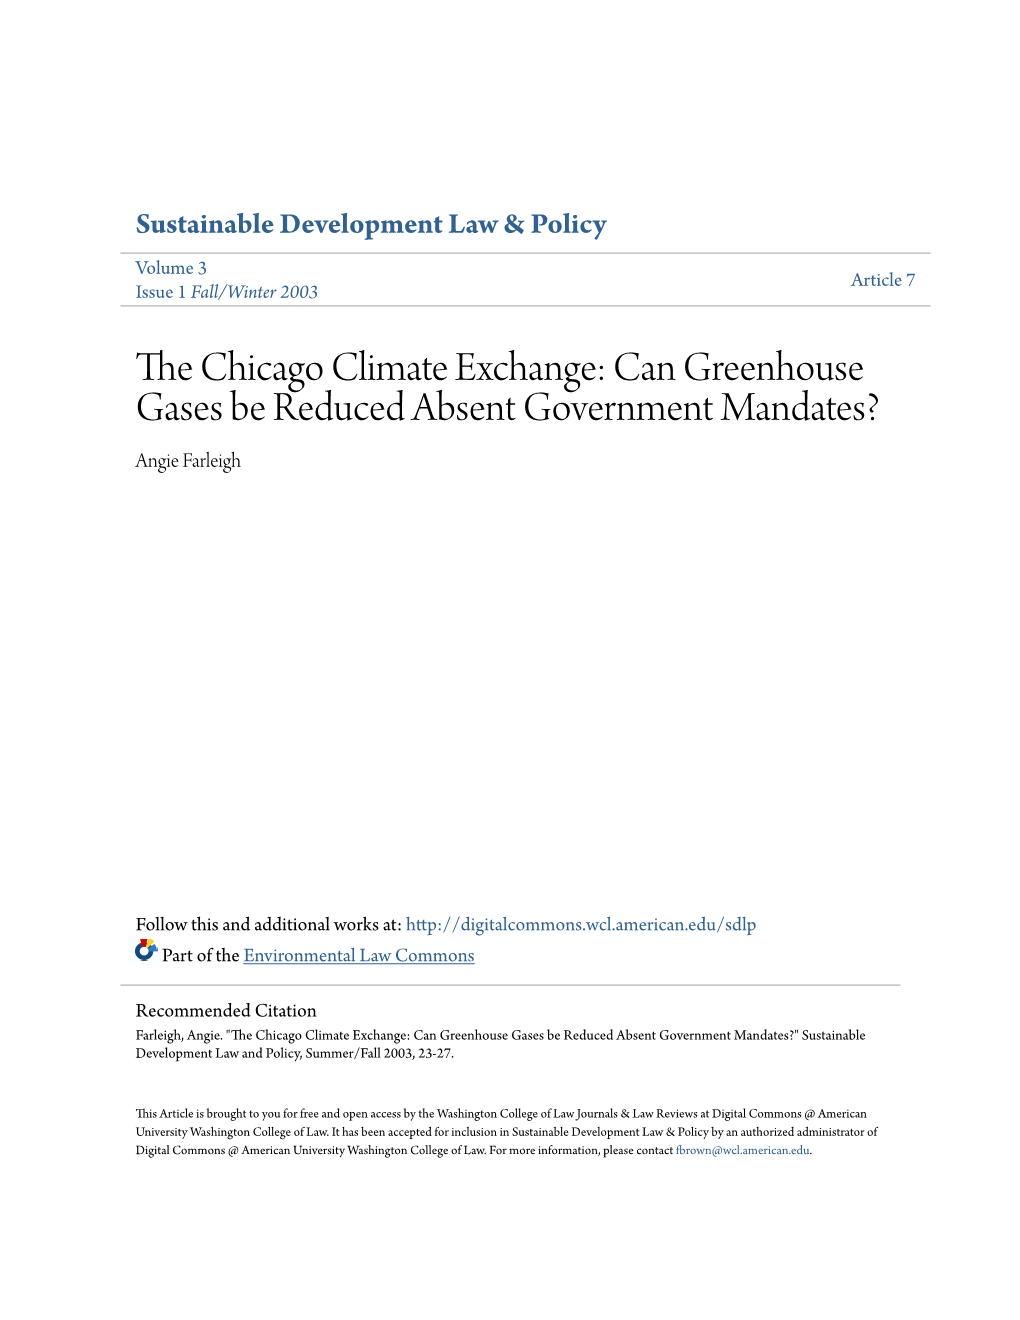 The Chicago Climate Exchange: Can Greenhouse Gases Be Reduced Absent Government Mandates?